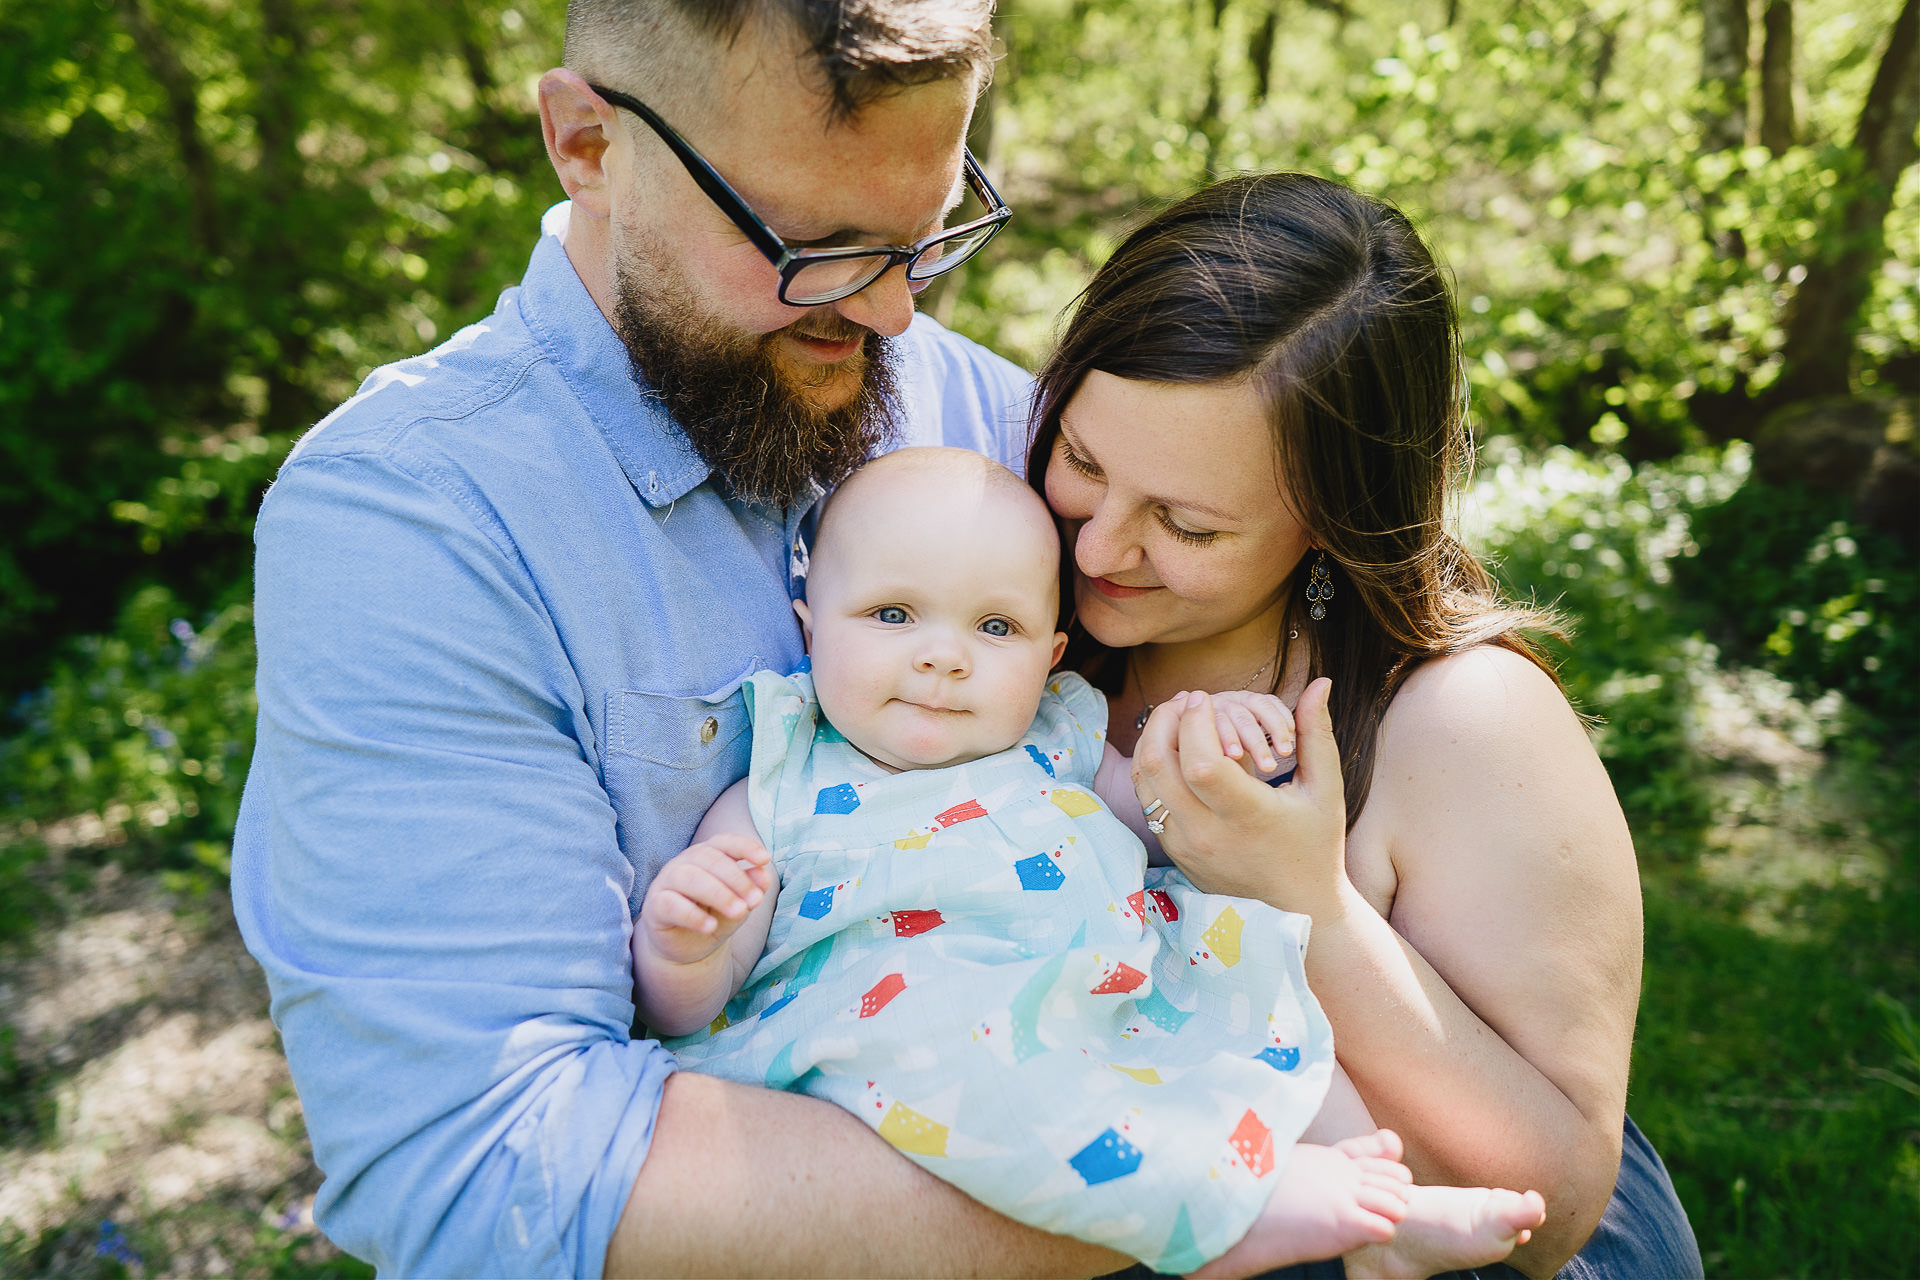 Family photograph of parents cuddling a baby in woodland